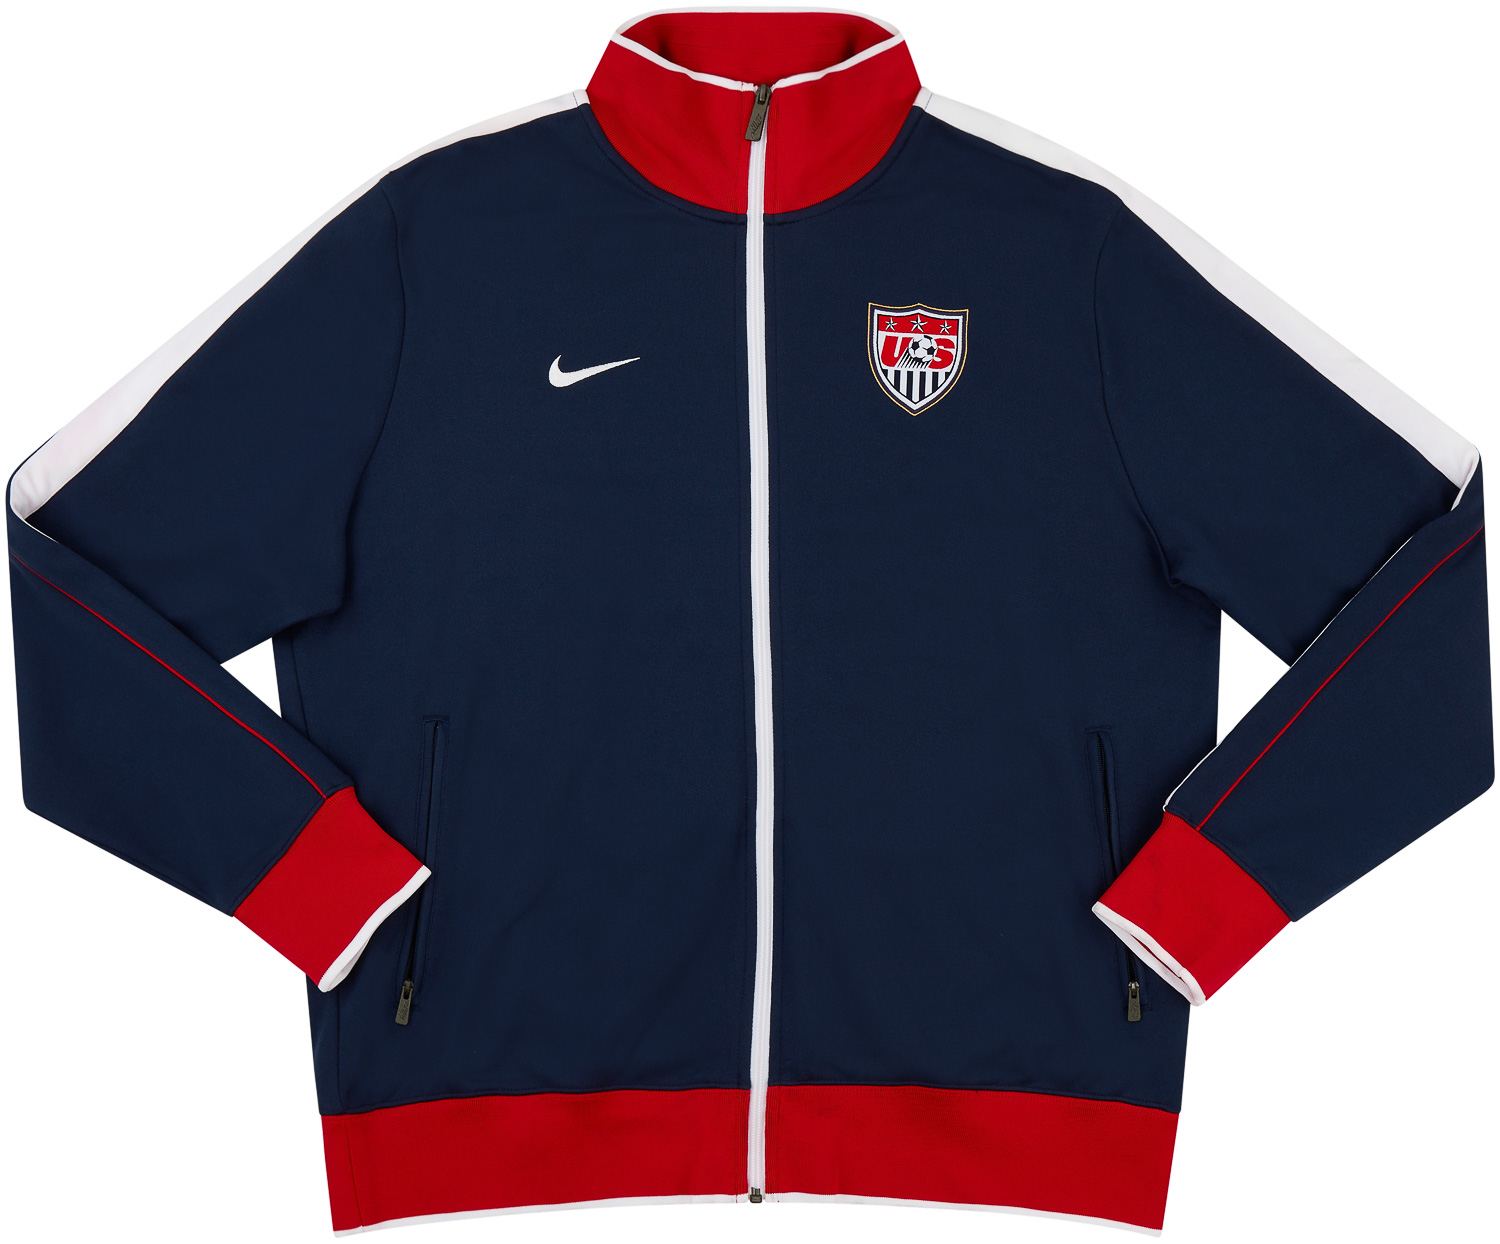 2010-11 USA Nike N98 Track Jacket (Excellent) XL